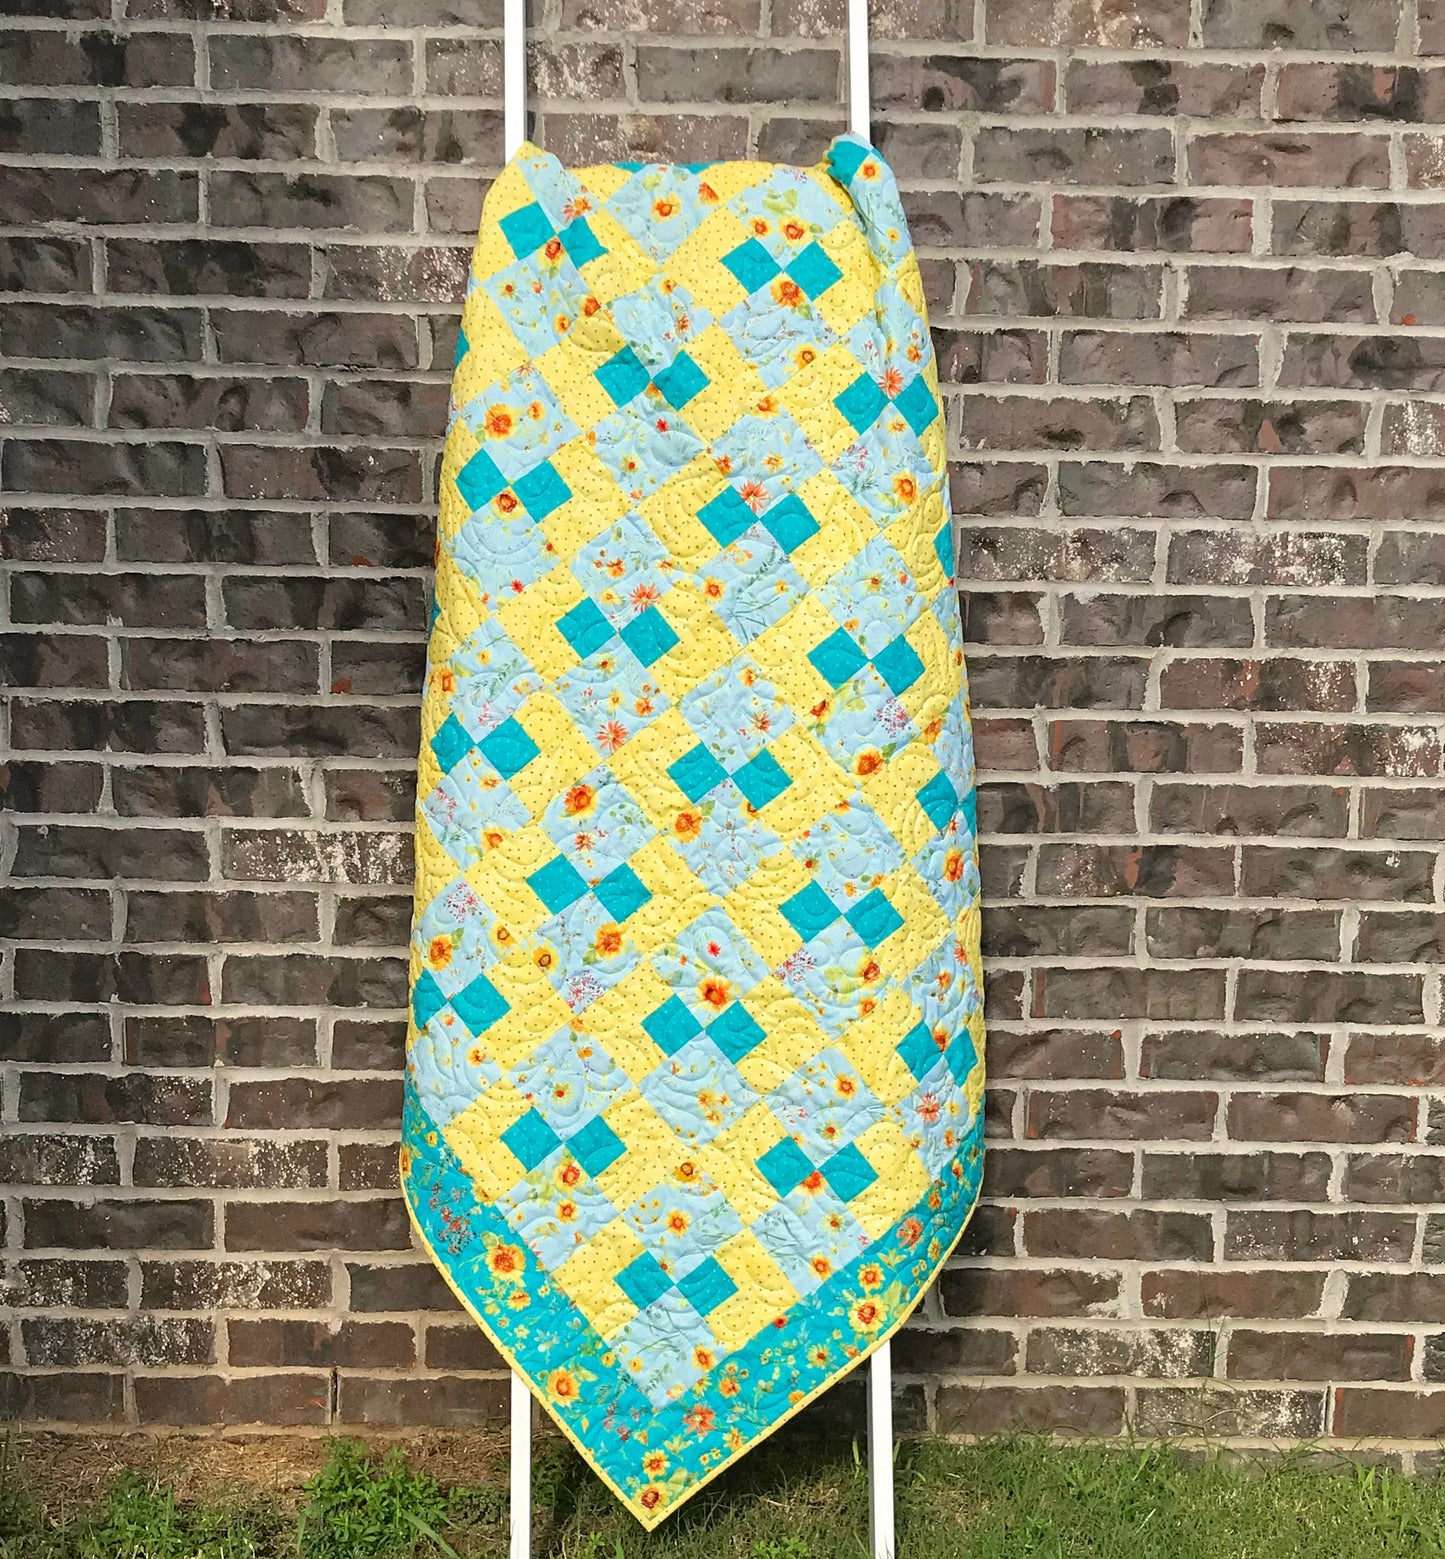 Teal and Yellow Sunflower Floral Throw Quilt, Handmade Four Patch Quilt with Teal and Yellow Flowers, Teal and Yellow Throw Quilt 61" X 69"